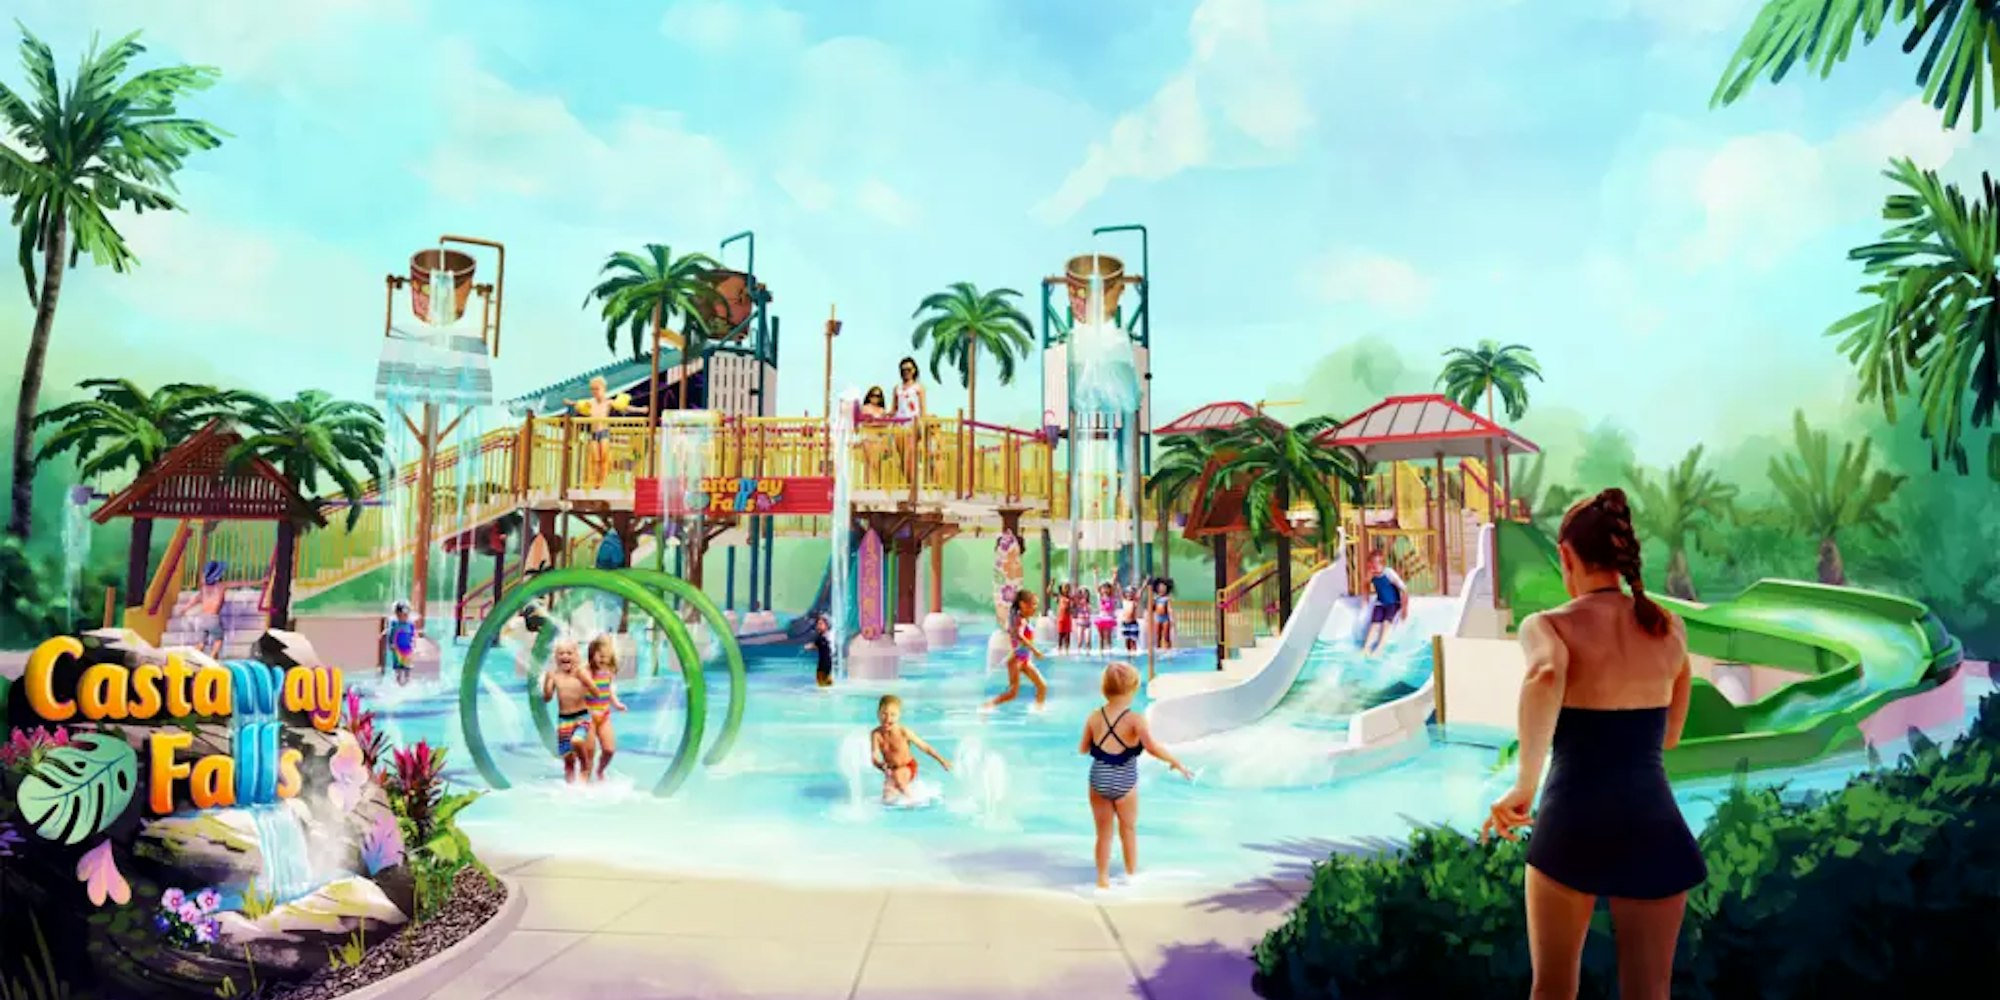 Cover Image for Adventure Island Water Park Adding All-New Attraction